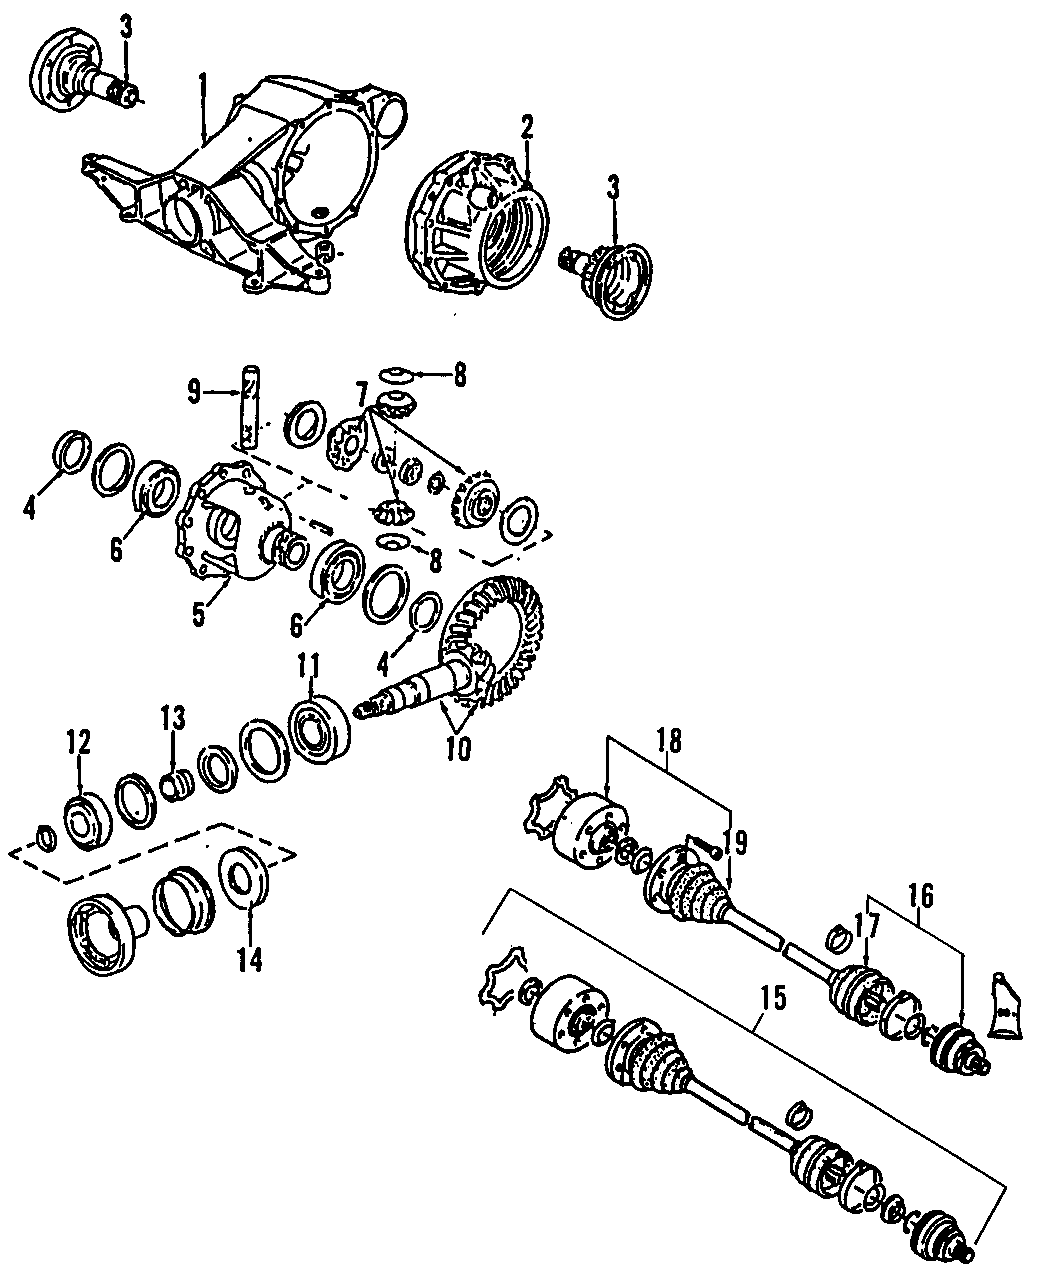 1DRIVE AXLES. REAR AXLE. AXLE SHAFTS & JOINTS. DIFFERENTIAL. PROPELLER SHAFT.https://images.simplepart.com/images/parts/motor/fullsize/F257120.png